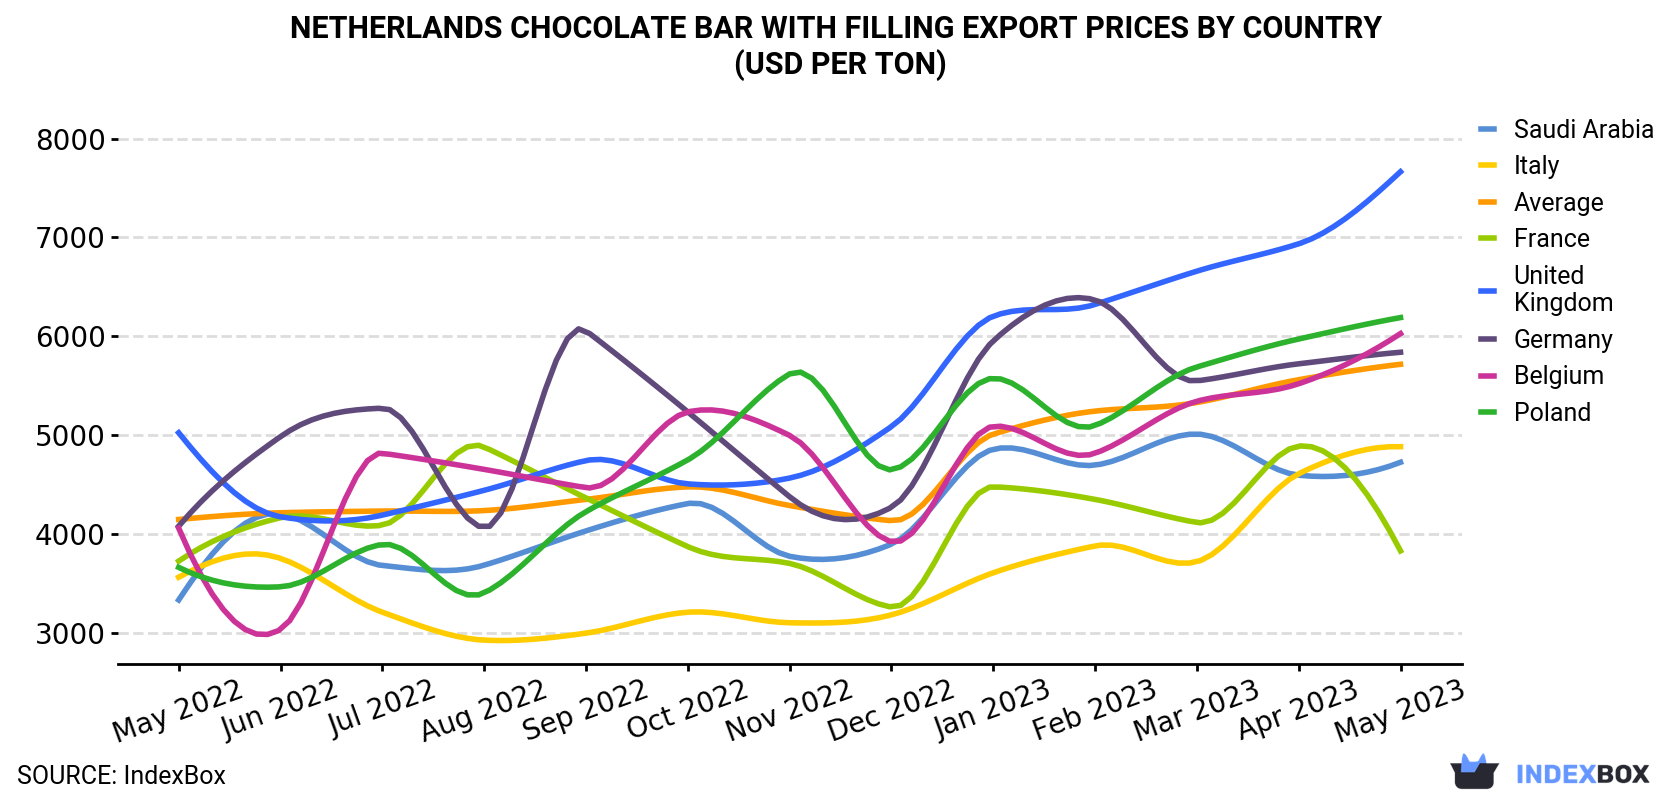 Netherlands Chocolate Bar With Filling Export Prices By Country (USD Per Ton)